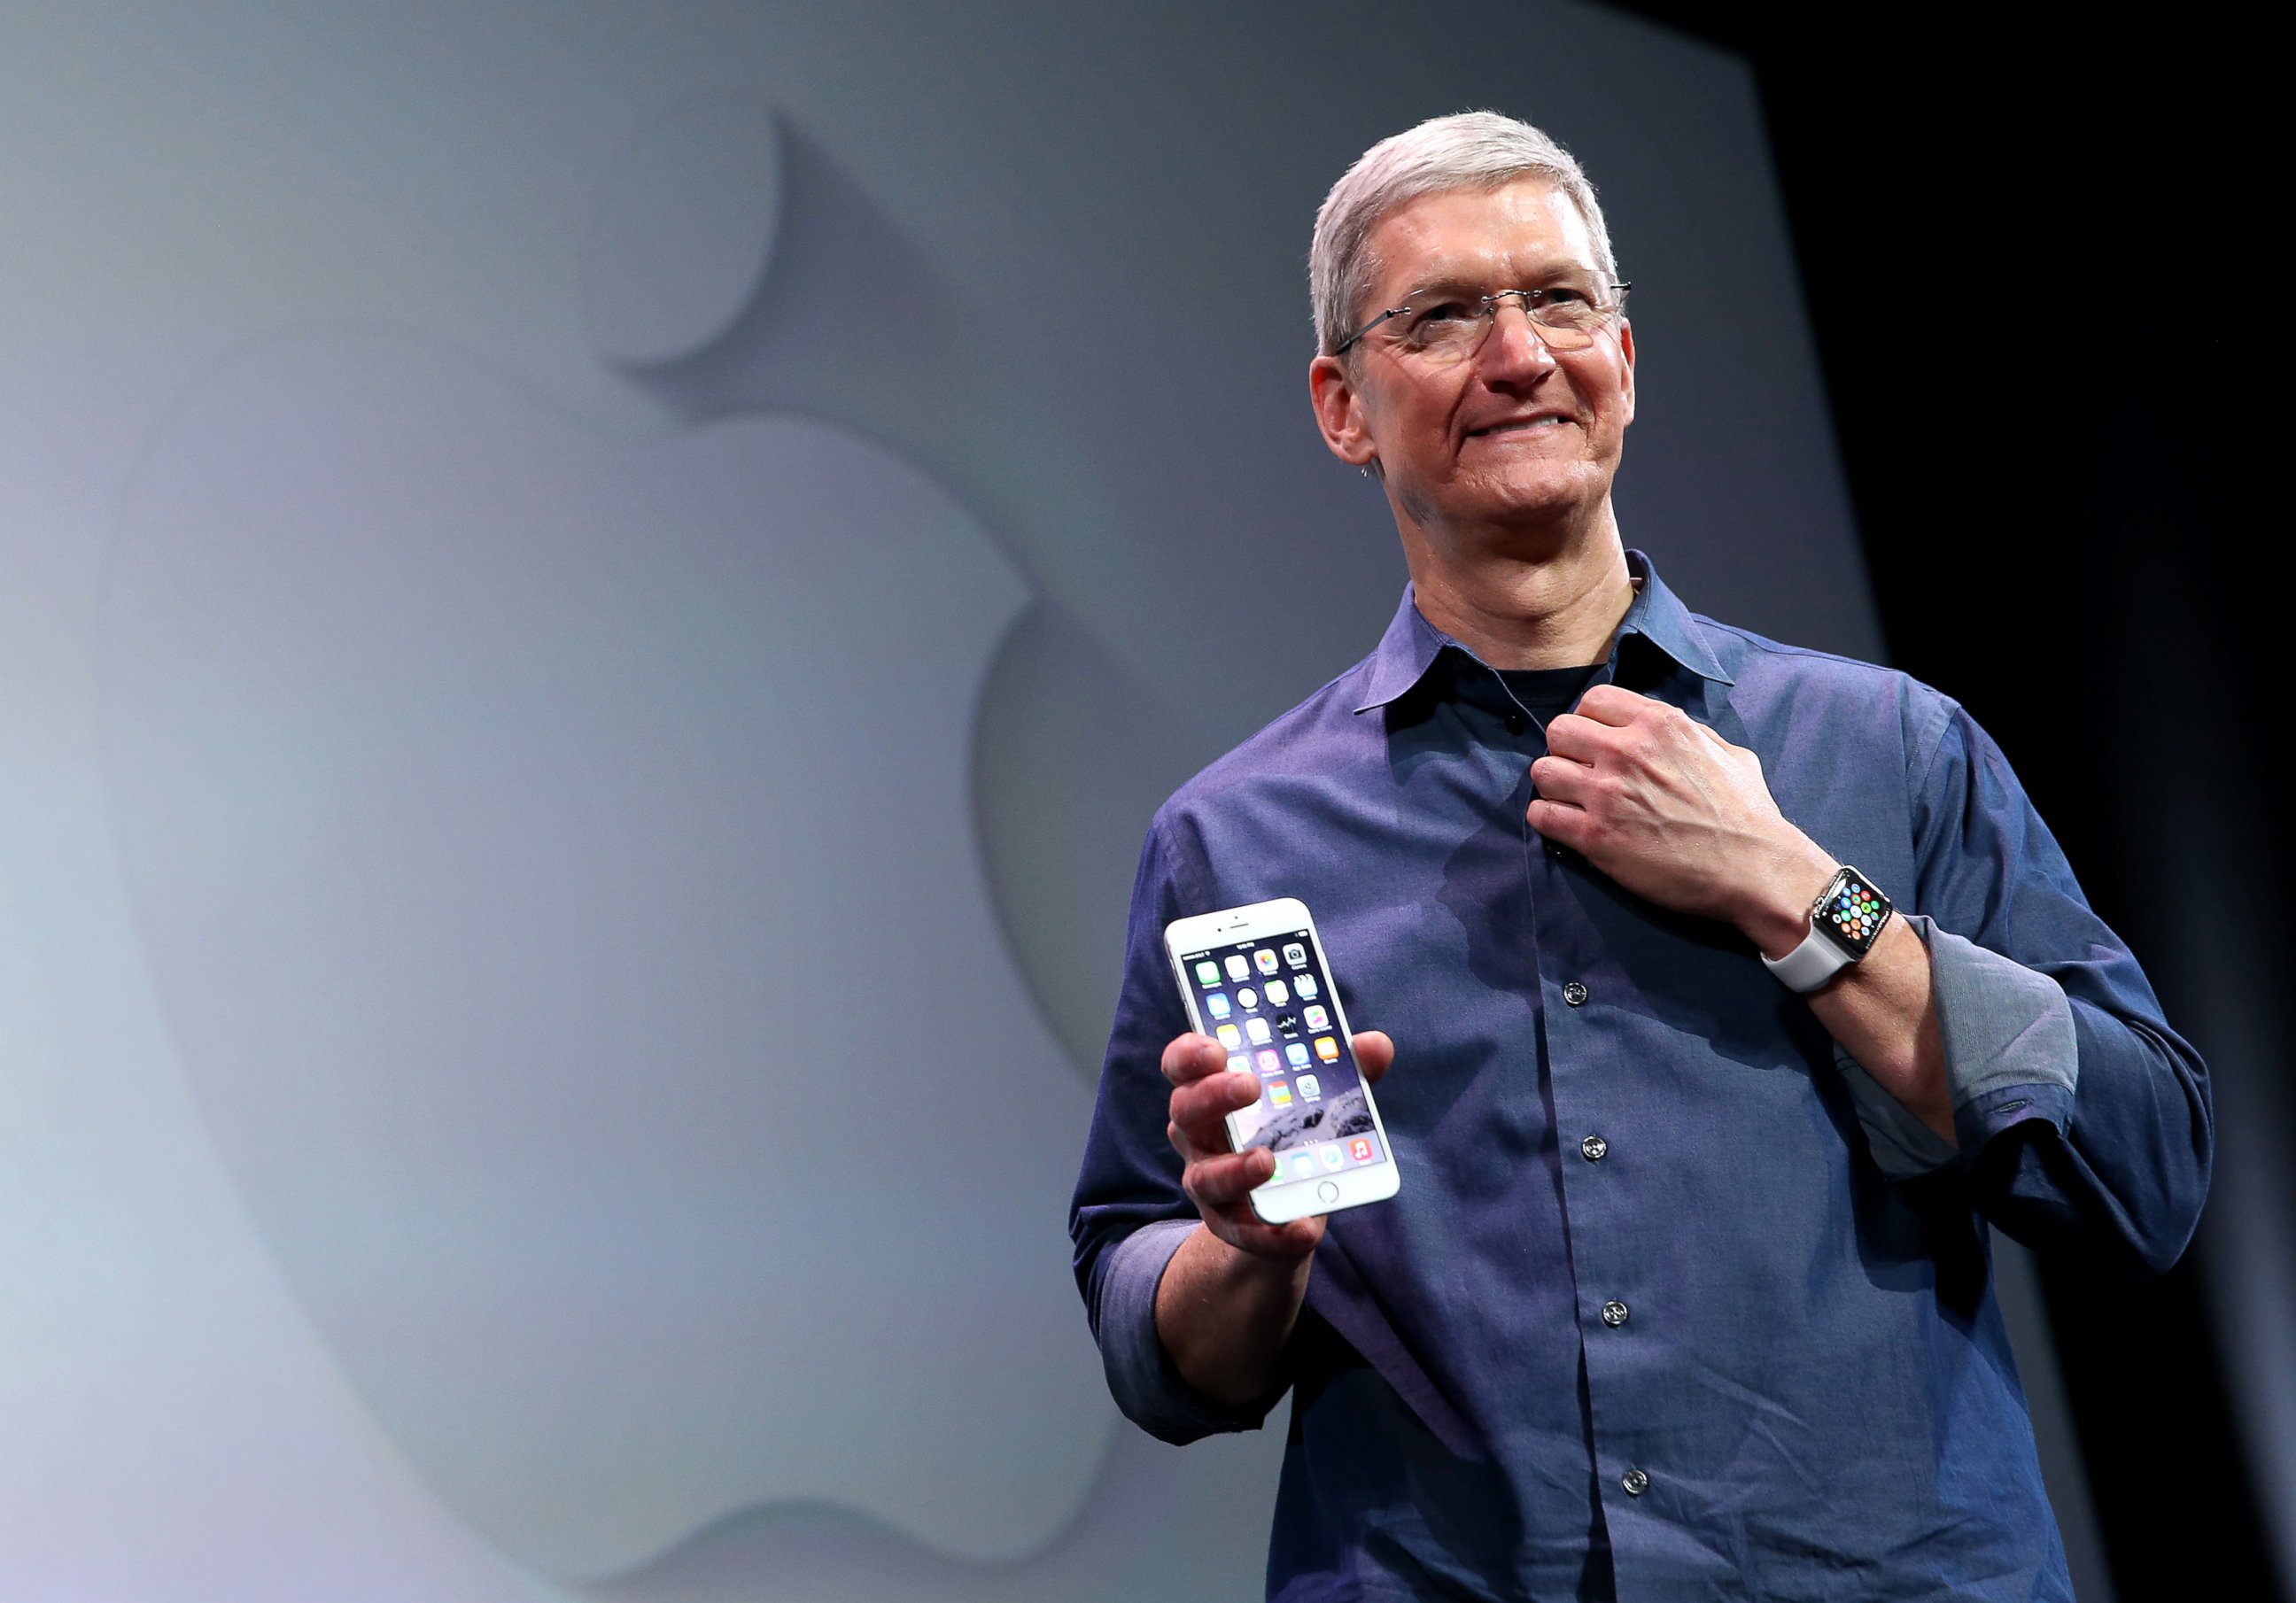 PHOTO: Apple CEO Tim Cook shows off the new iPhone 6 and the Apple Watch during an Apple special event at the Flint Center for the Performing Arts, Sept. 9, 2014, in Cupertino, Calif. 